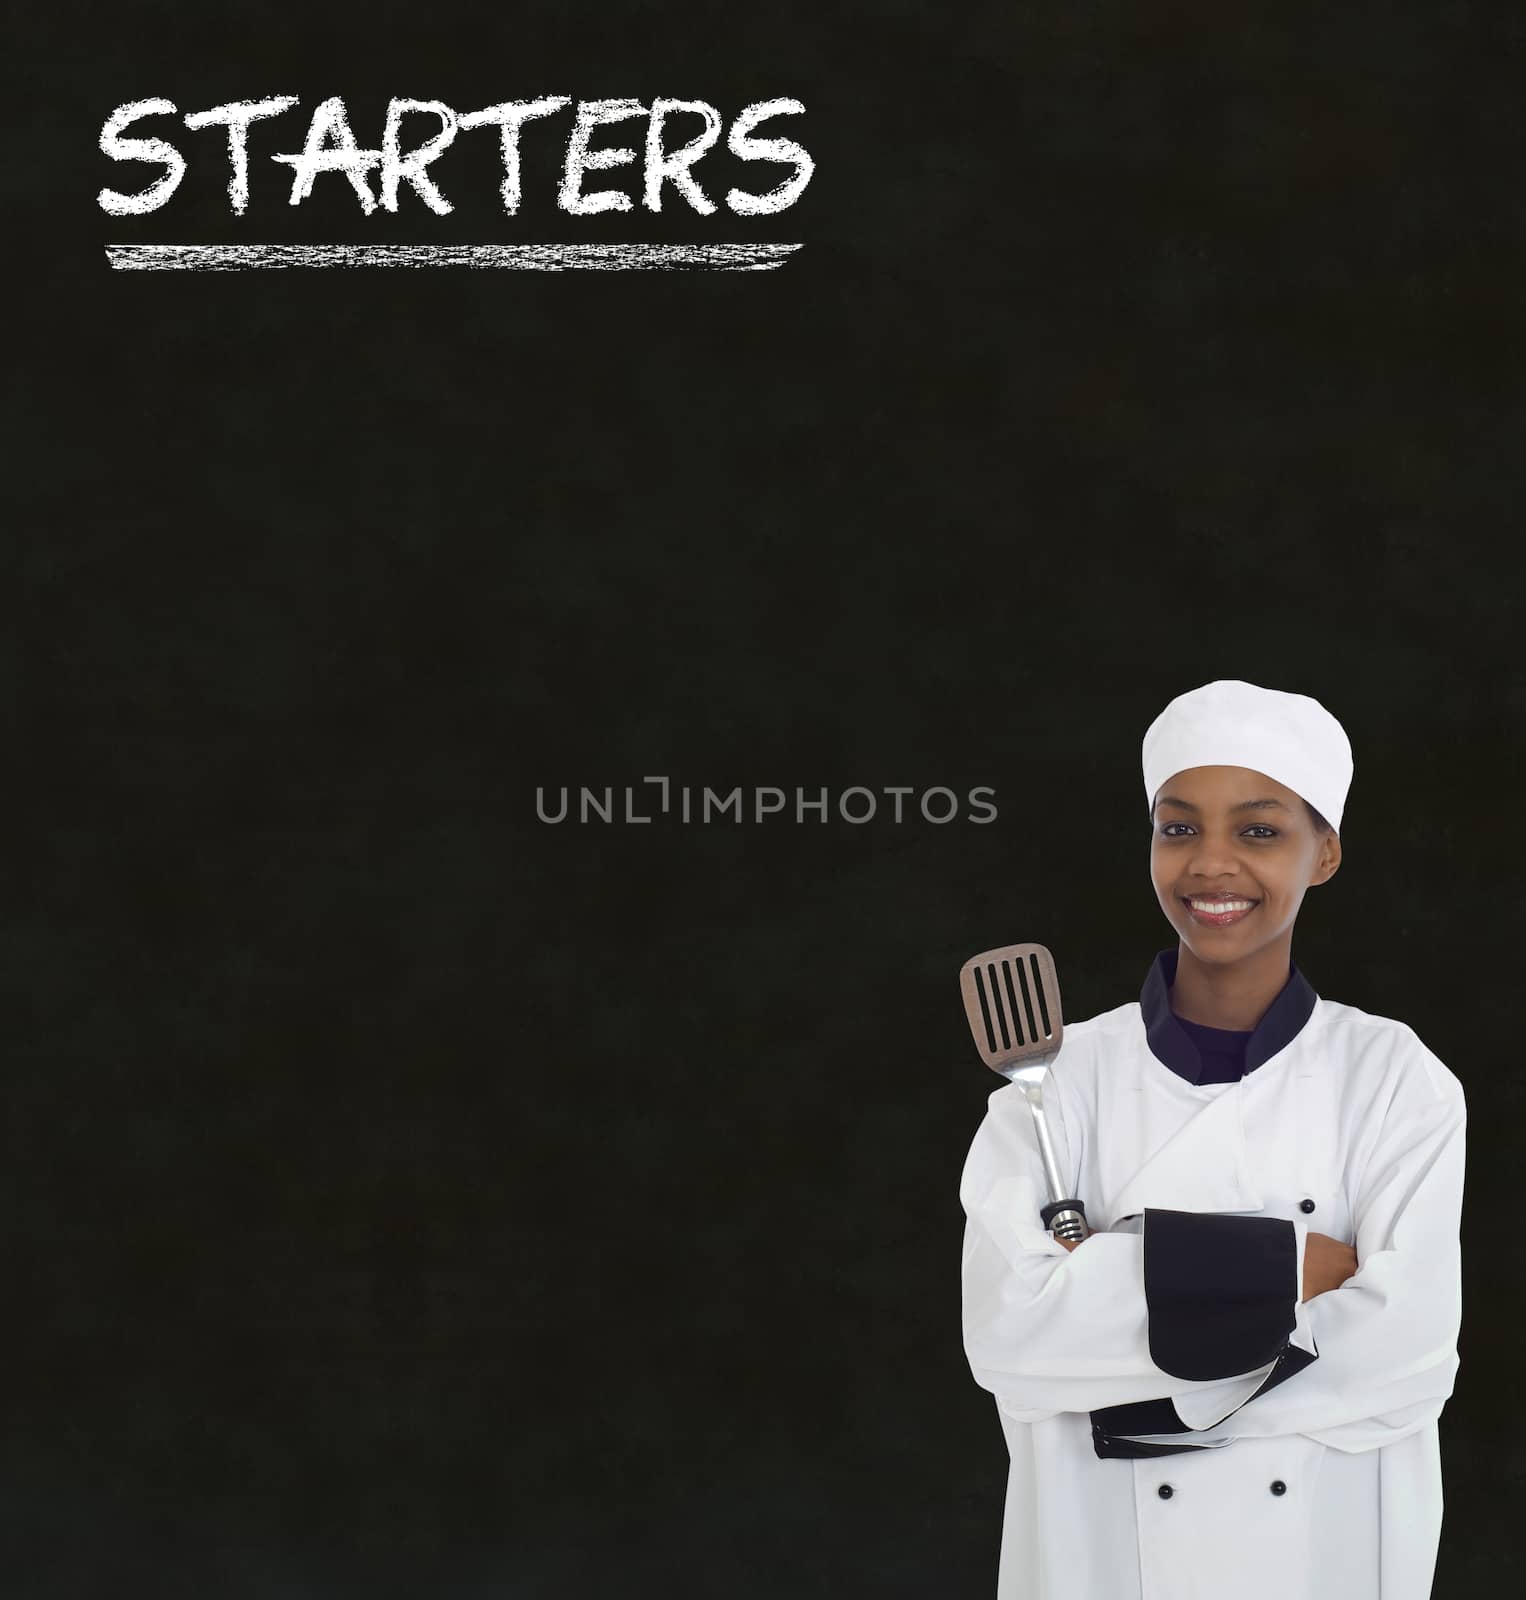 Chef with chalk starters sign written on blackboard background